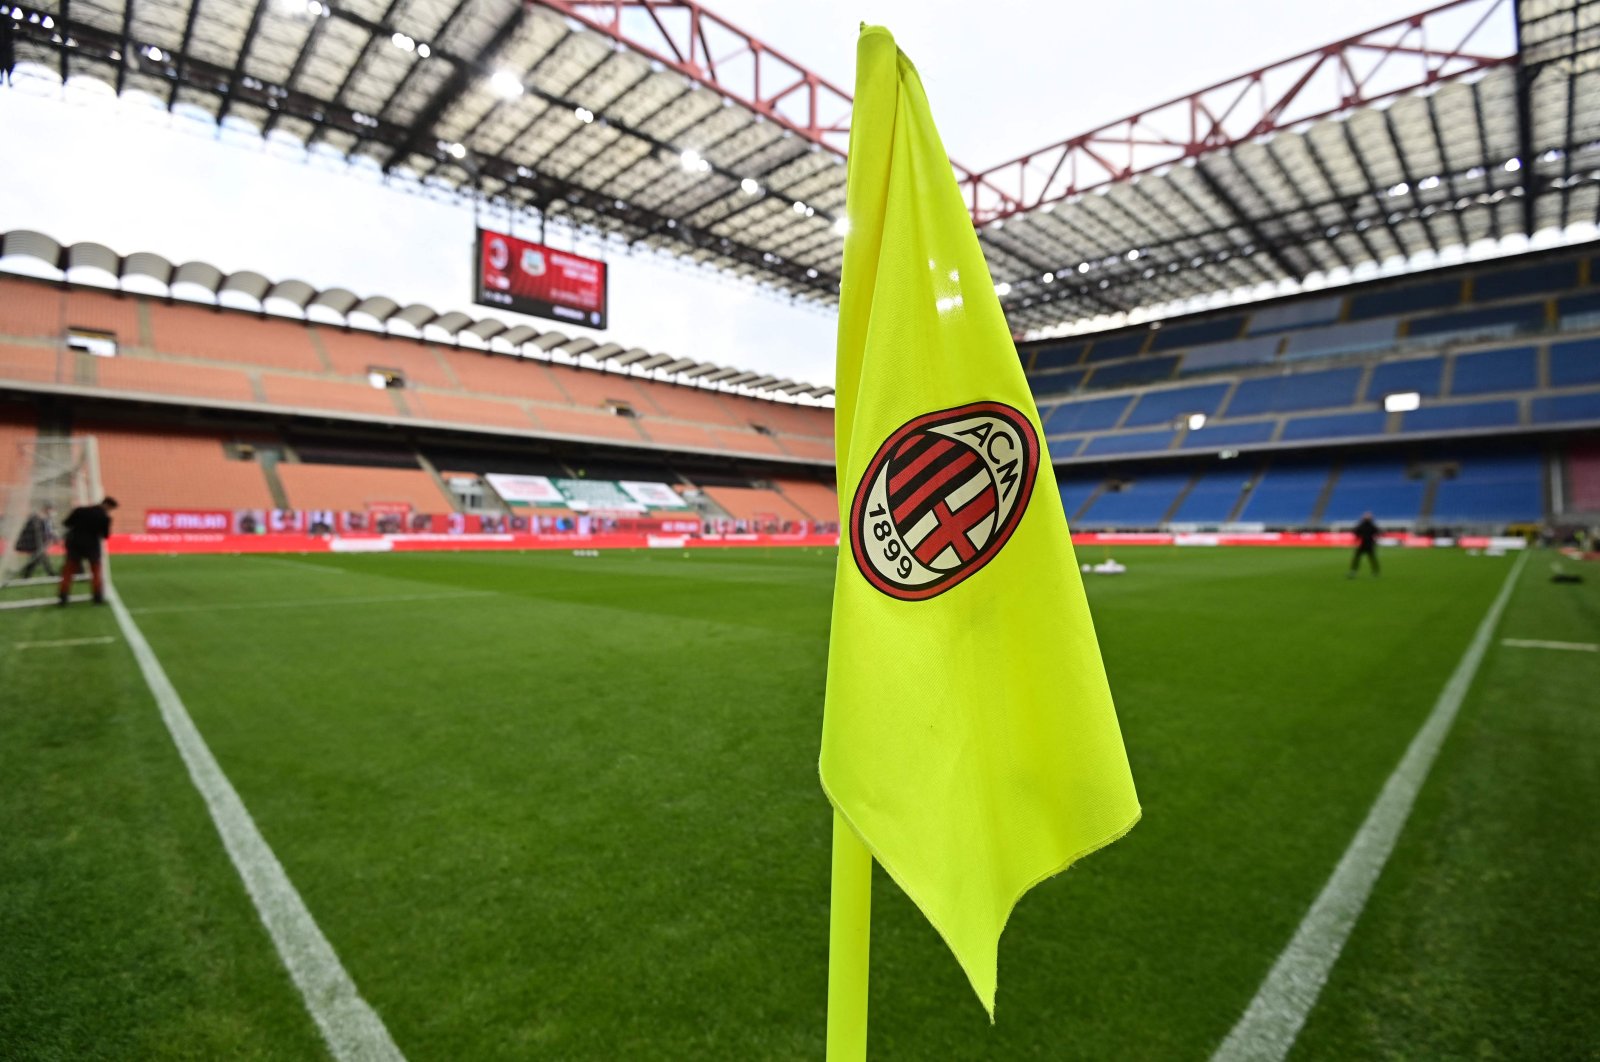 The AC Milan logo is pictured on a corner flag prior to an Italian Serie A football match at the San Siro stadium in Milan, Italy, April 21, 2021. (AFP Photo)